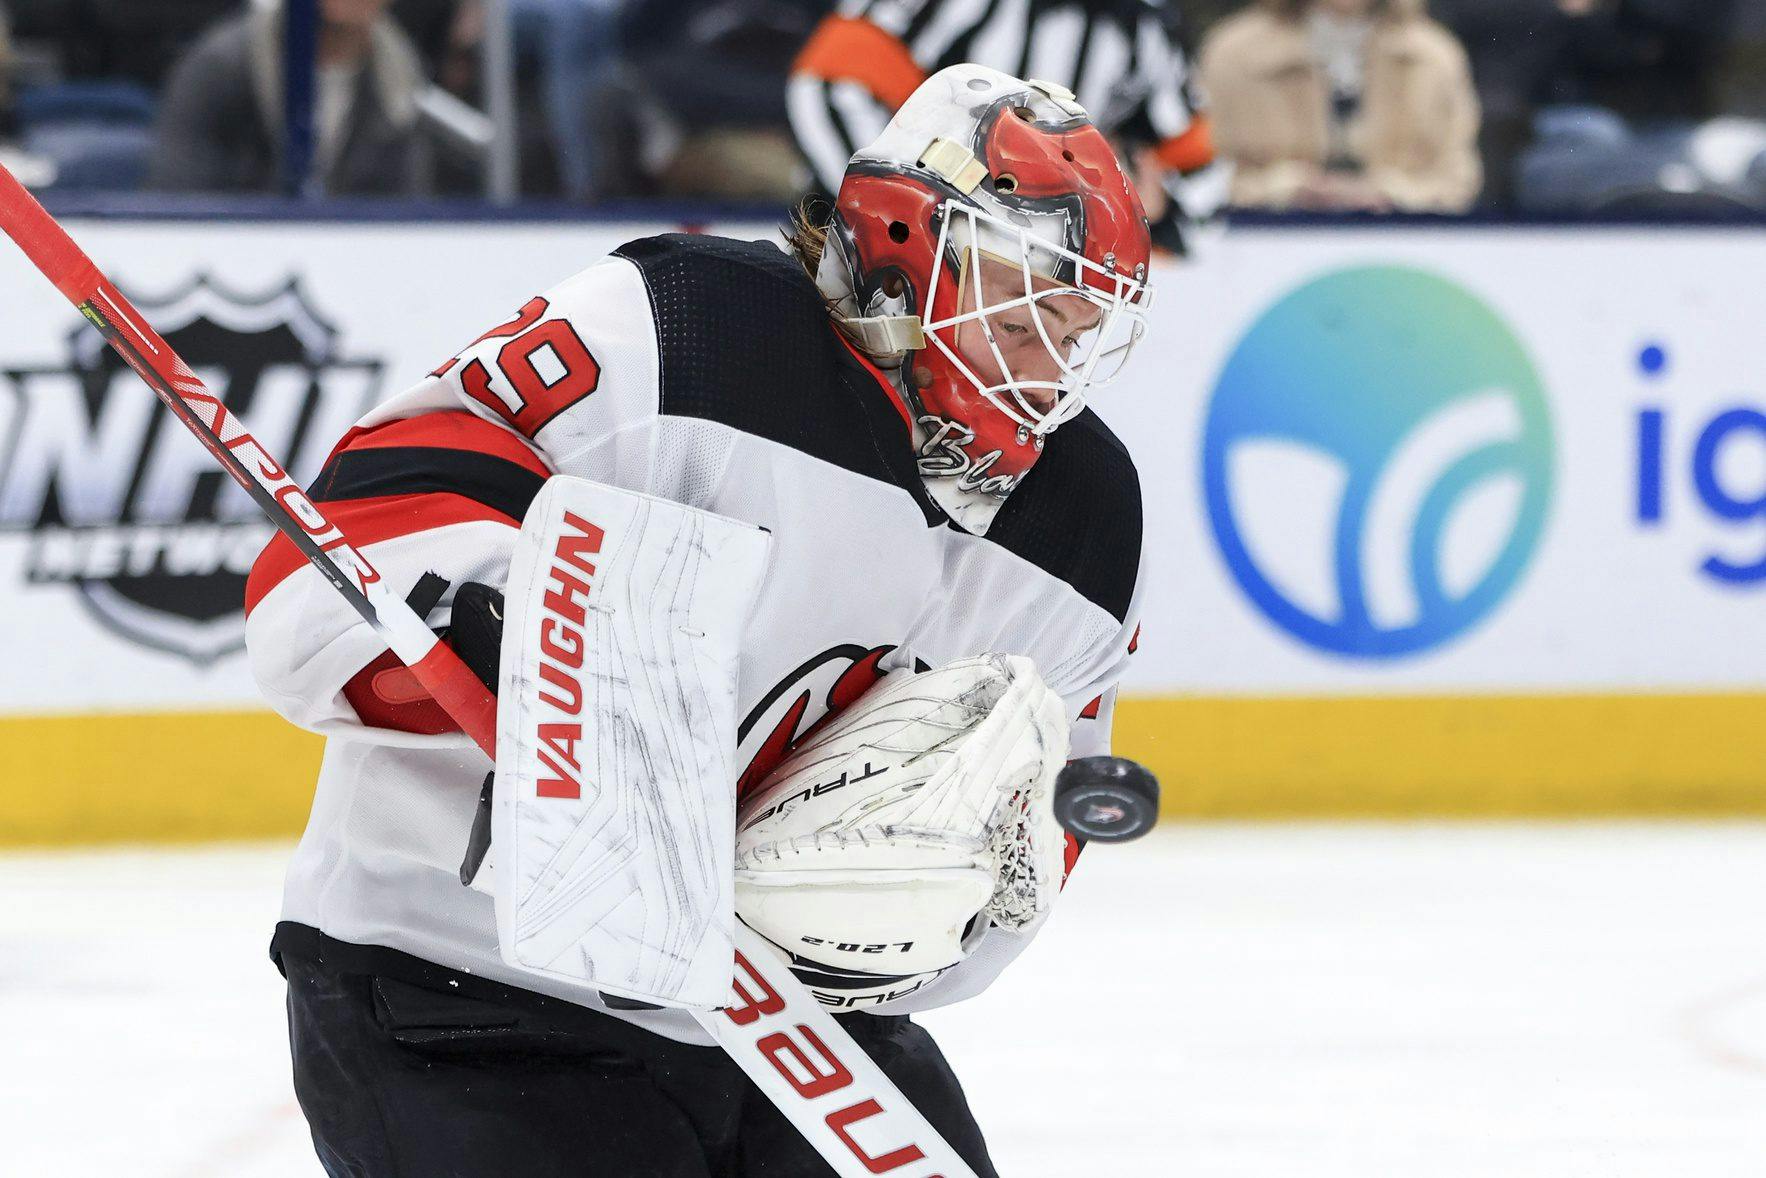 Sharks add Mackenzie Blackwood! 🦈 The @sanjosesharks add to their  goaltending depth in a deal with the @njdevils. 🤝